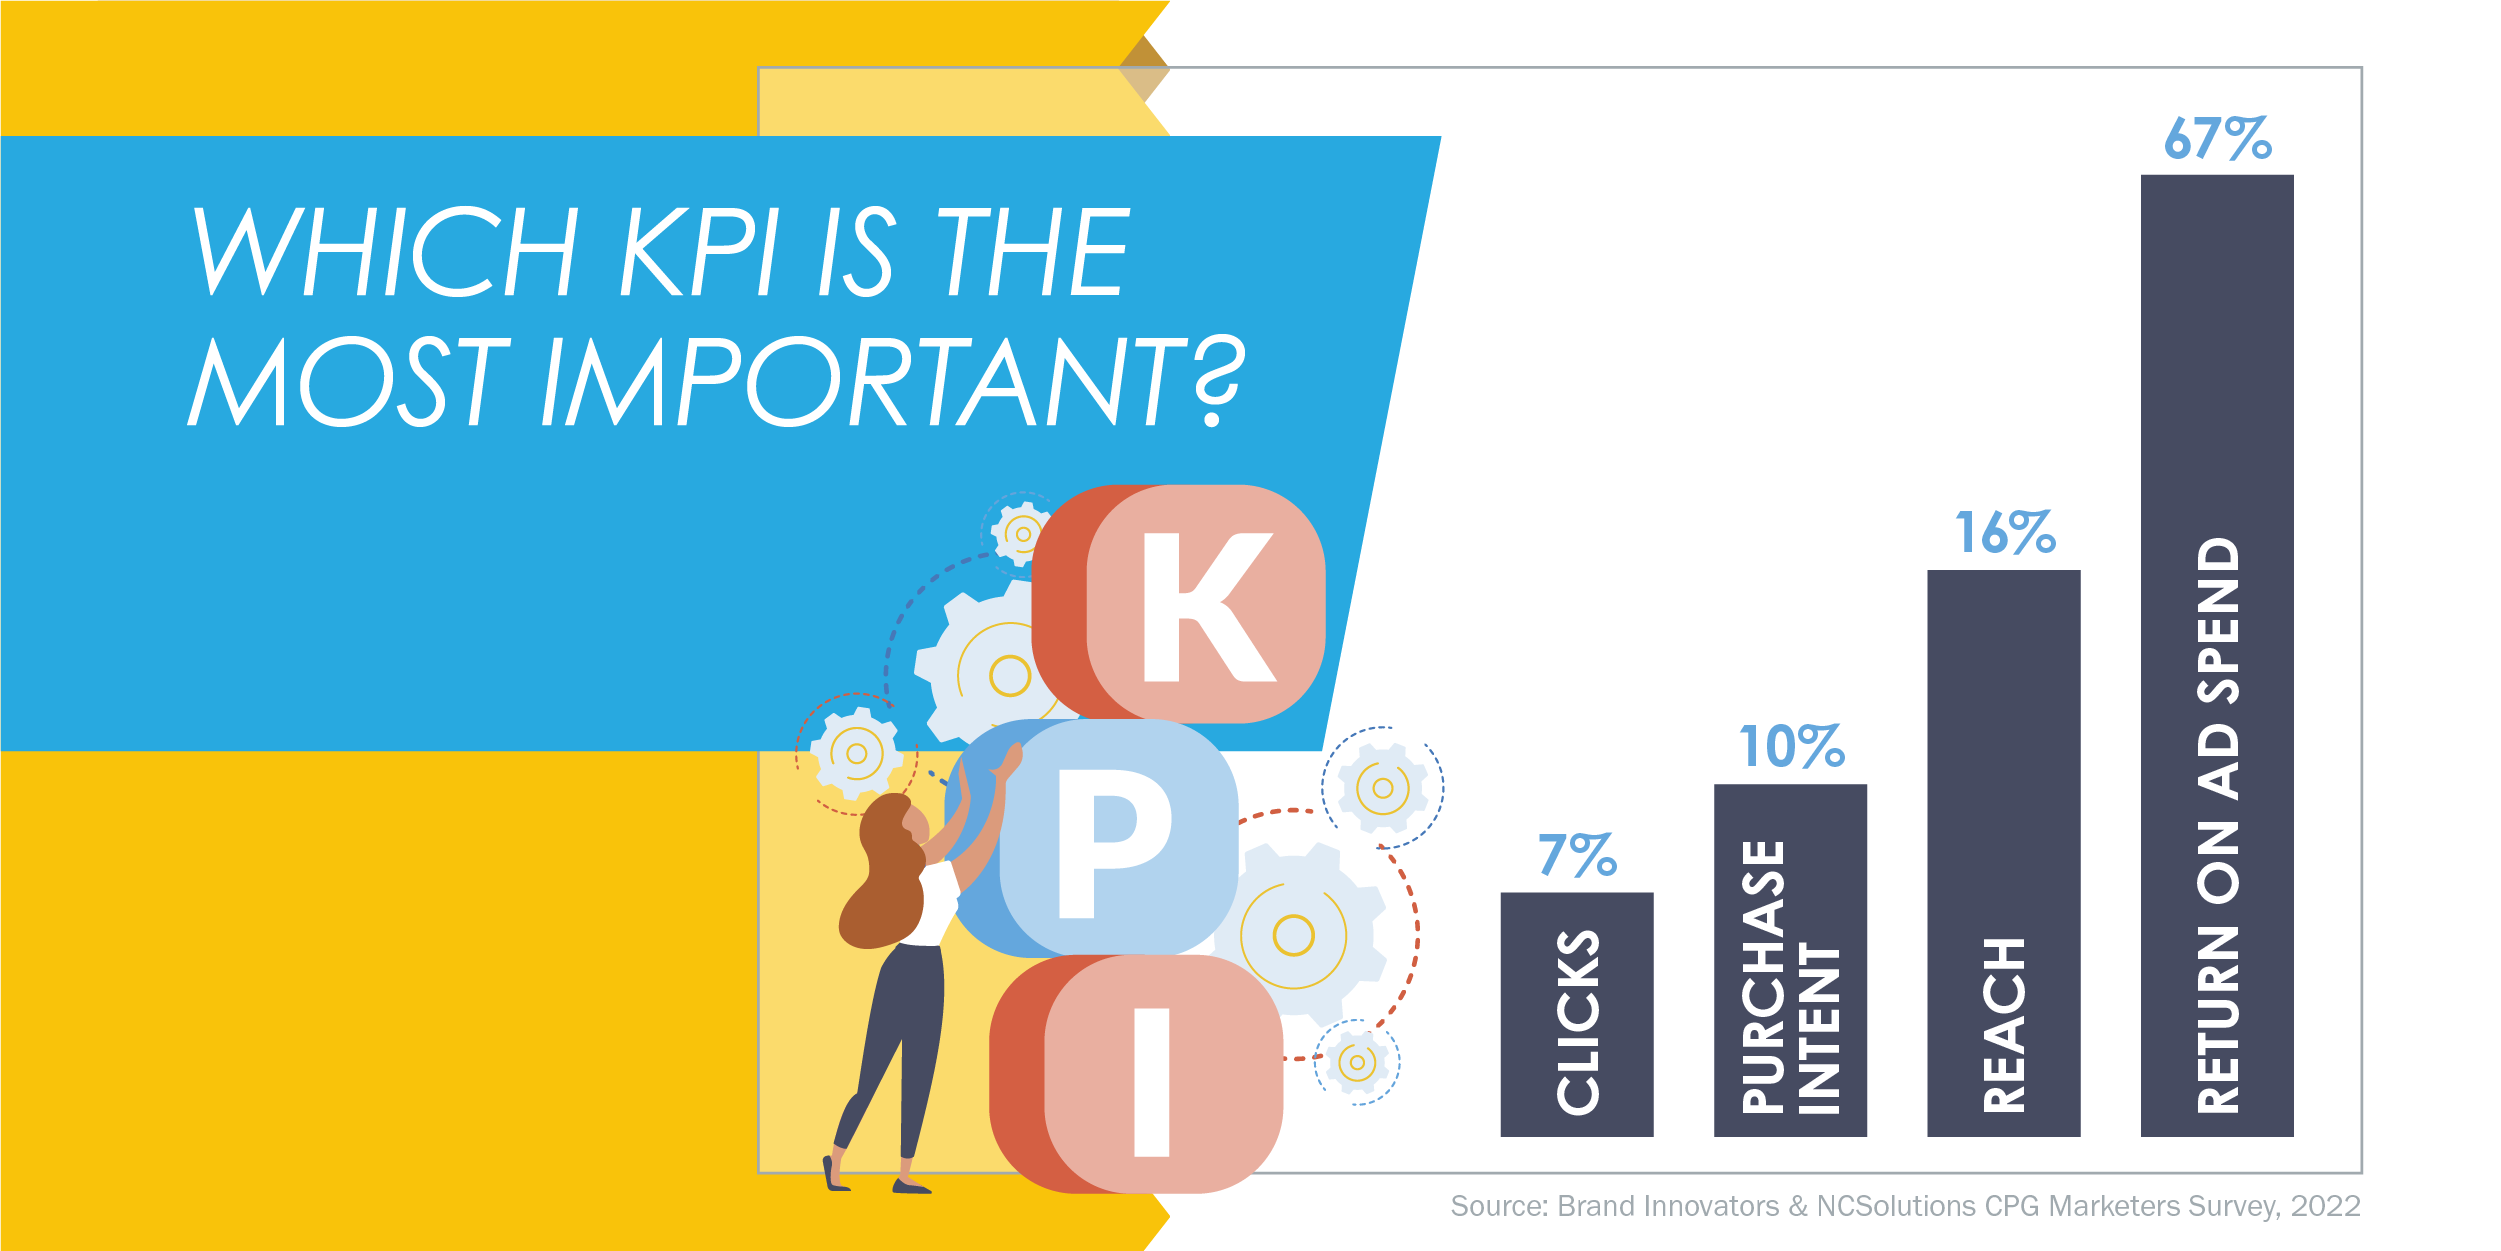 Bar chart image: Which KPI is the most important?  Clicks: 7%, purchase index: 10%, Reach 16% and ROAS 67%